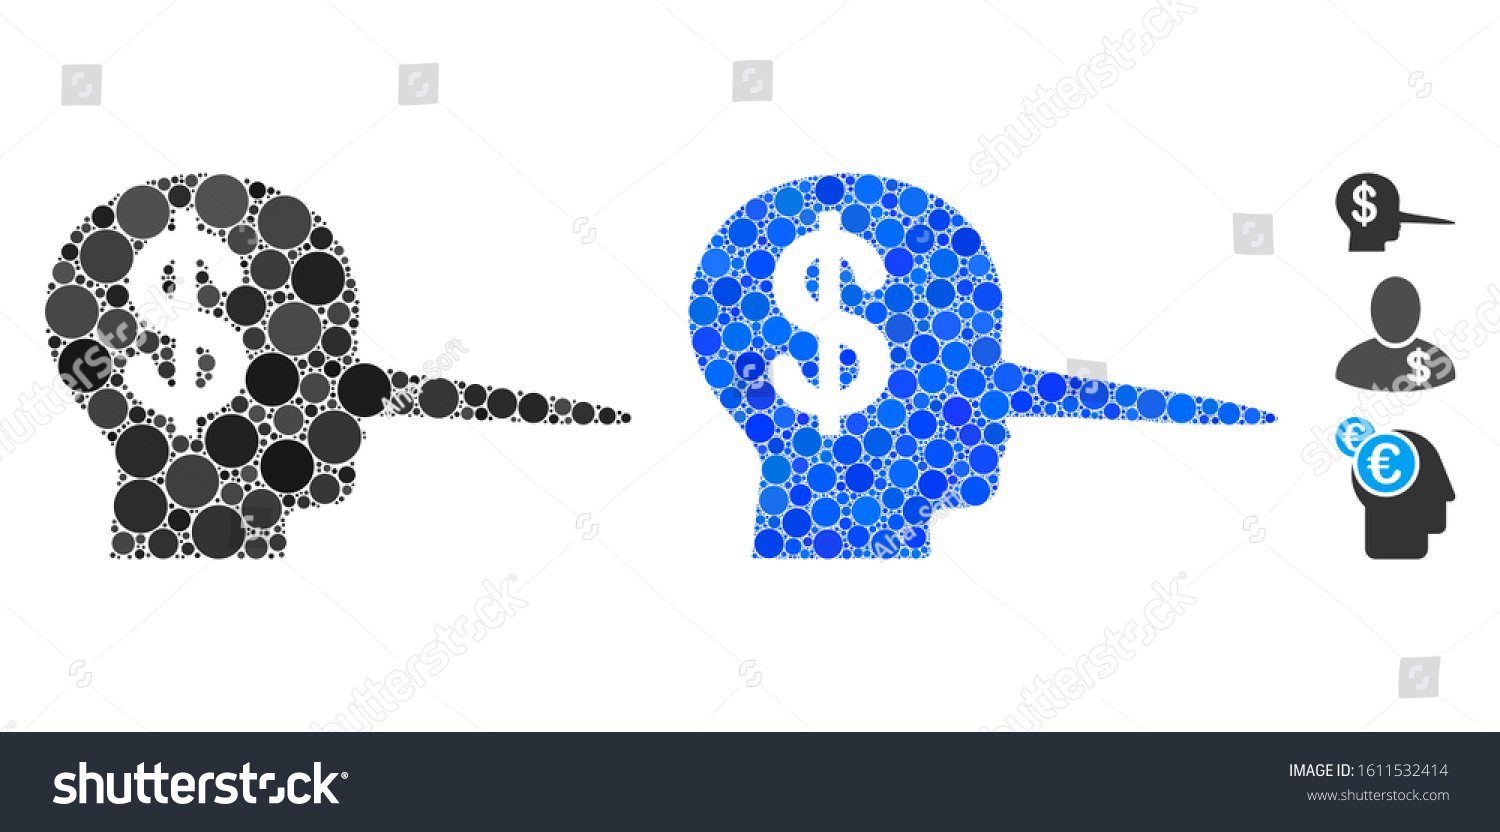 SVG of Financial scammer mosaic of small circles in various sizes and color hues, based on financial scammer icon. Vector random circles are united into blue mosaic. svg